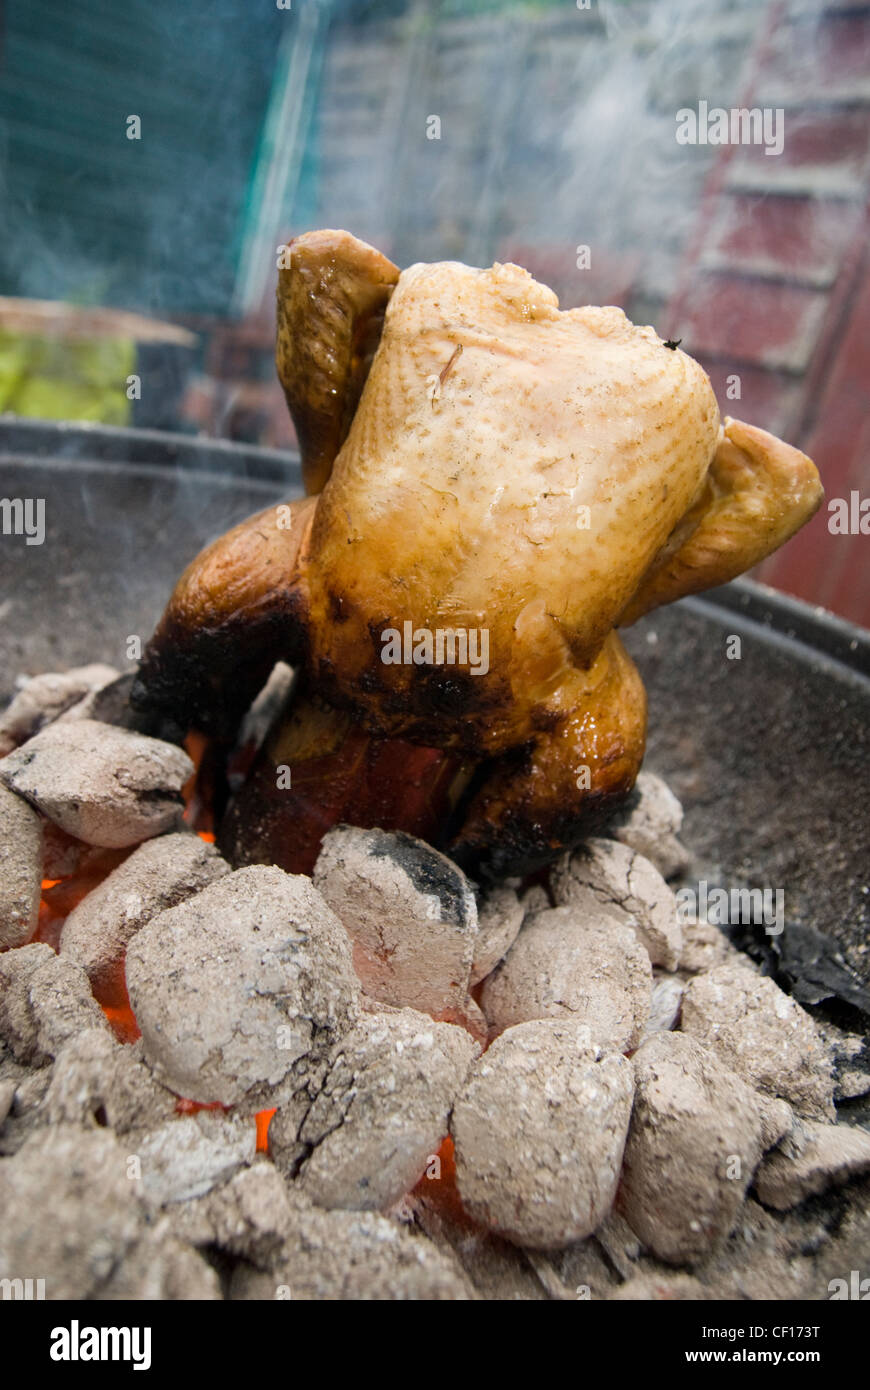 A chicken slow roasts on a barbecue Stock Photo